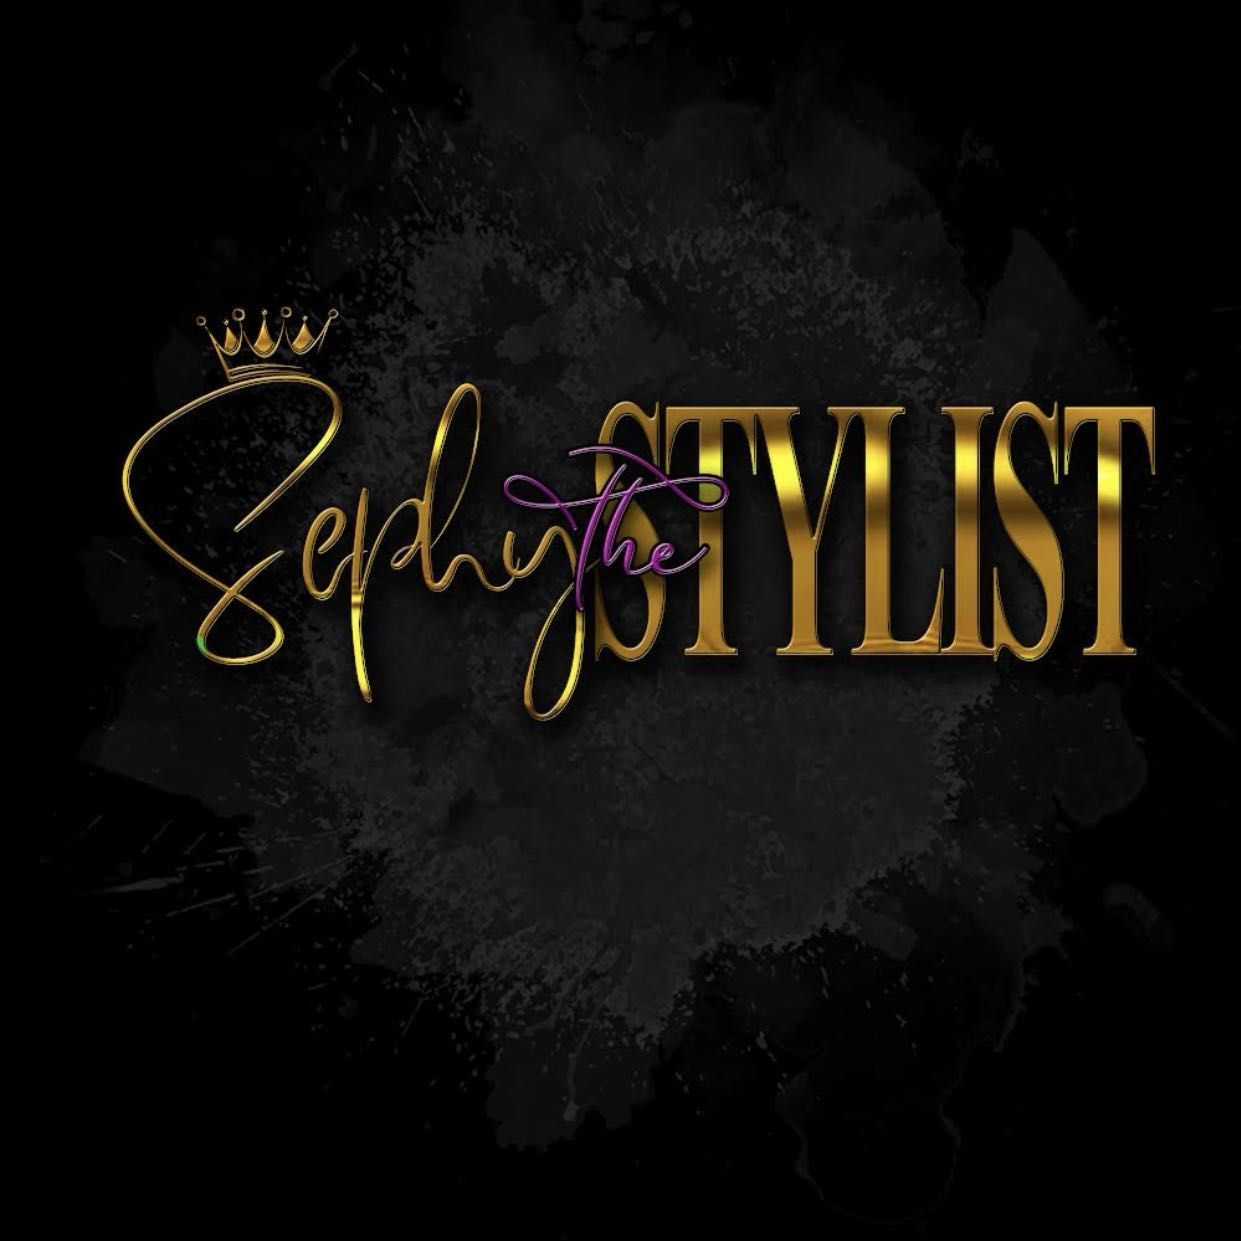 Sephythestylist, 121 E Rayen Ave, Suite 2, Youngstown, 44503